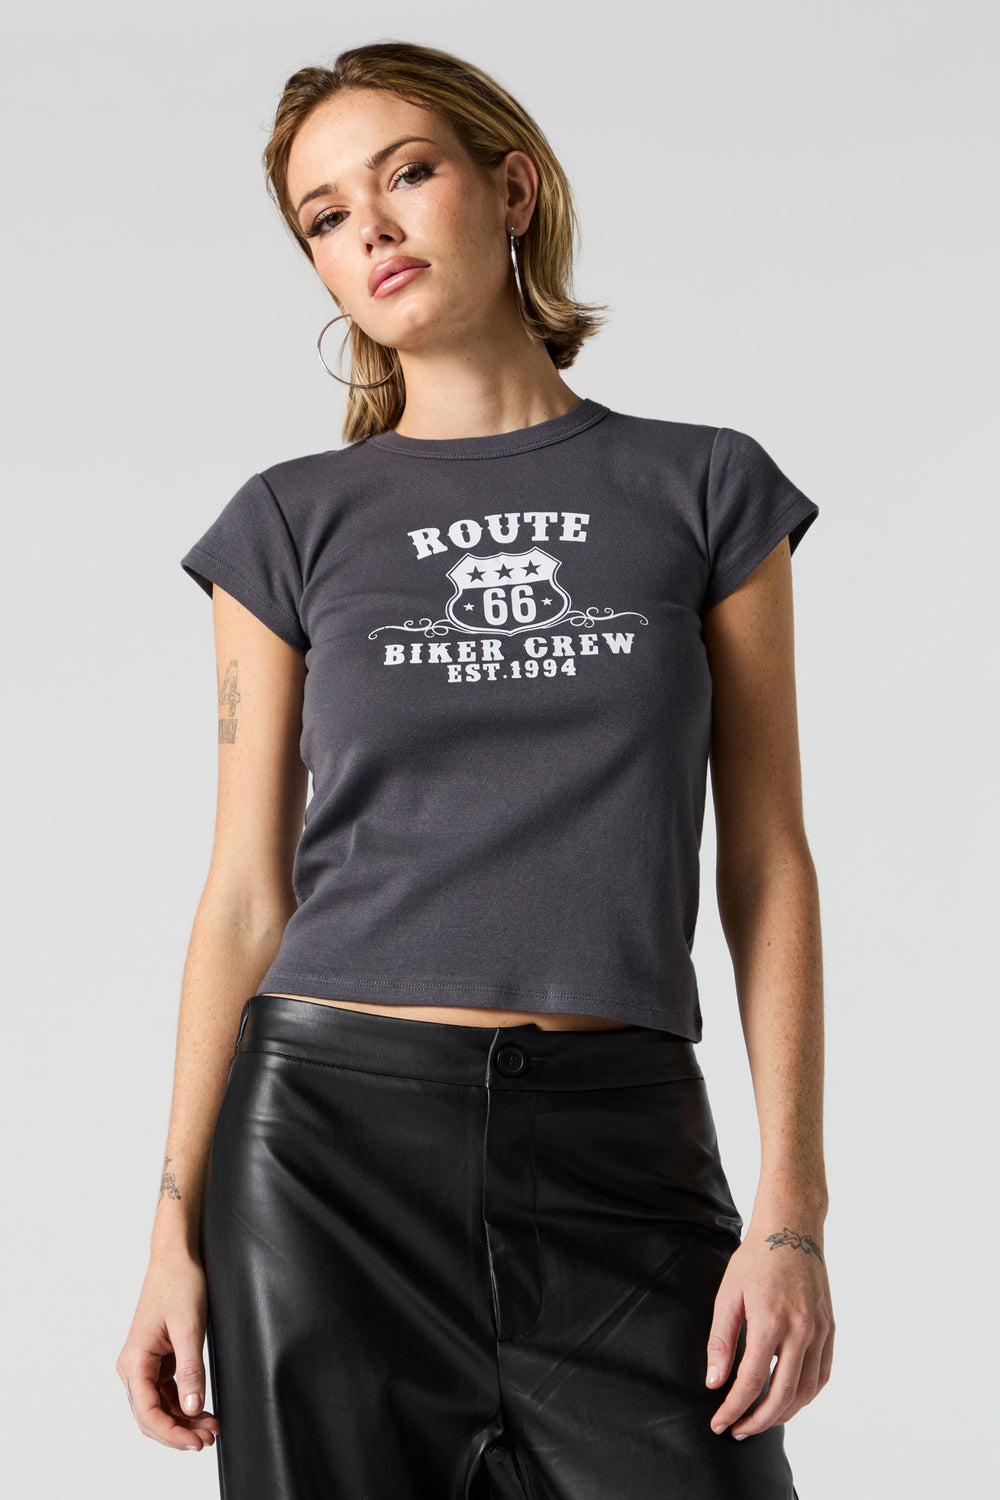 Route 66 Biker Crew Graphic Fitted T-Shirt Route 66 Biker Crew Graphic Fitted T-Shirt 2